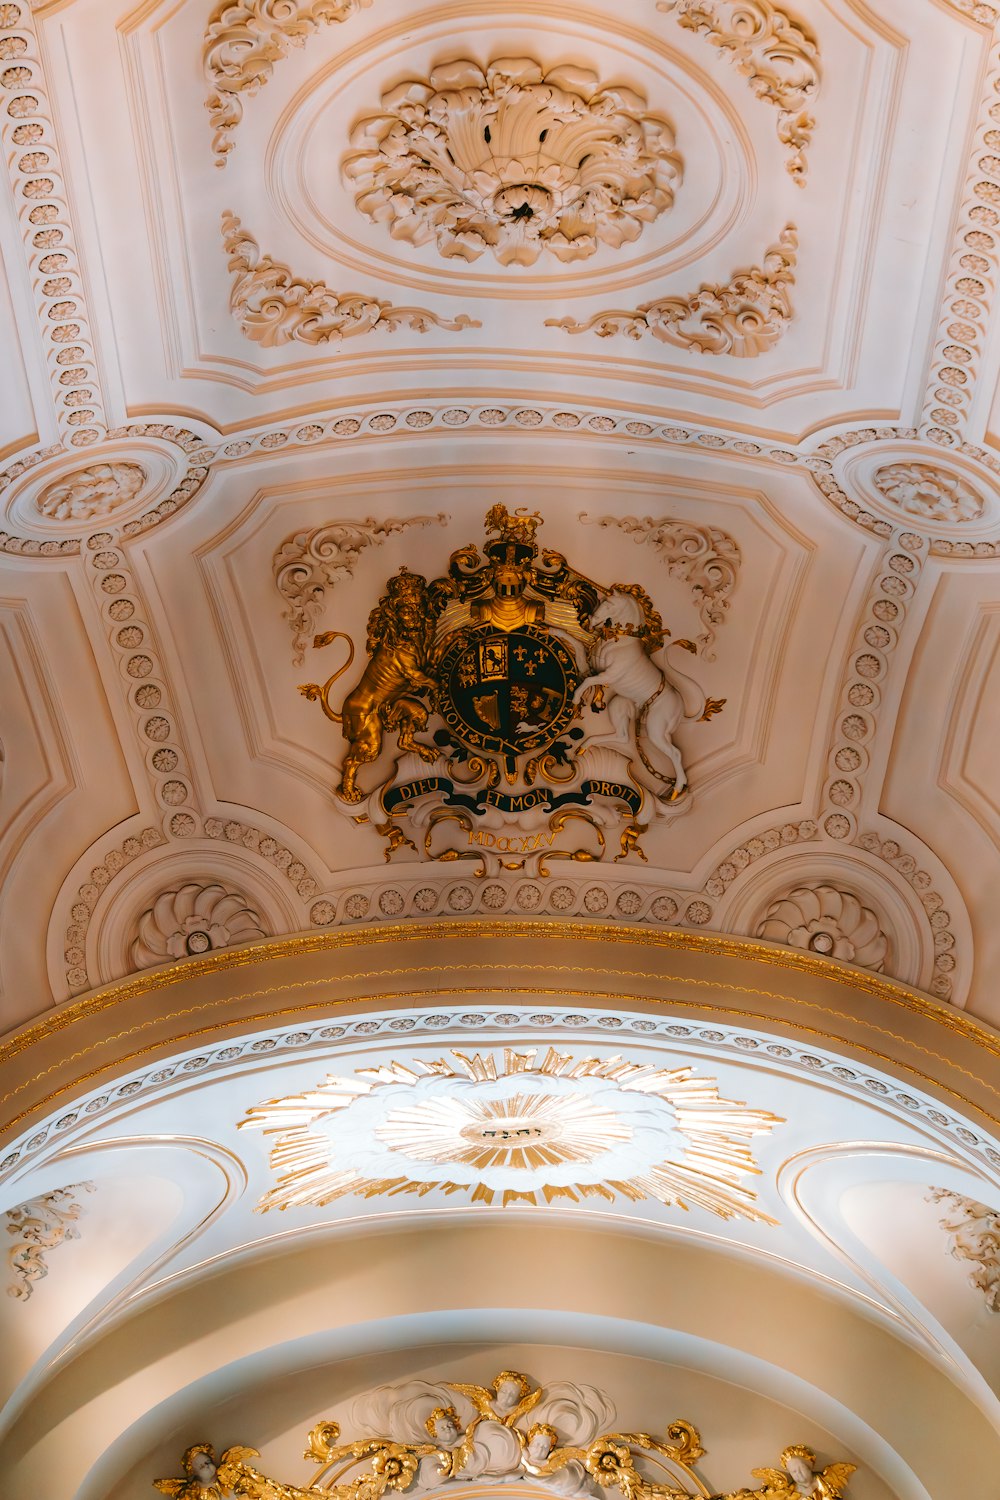 the ceiling of a church with a gold and white design